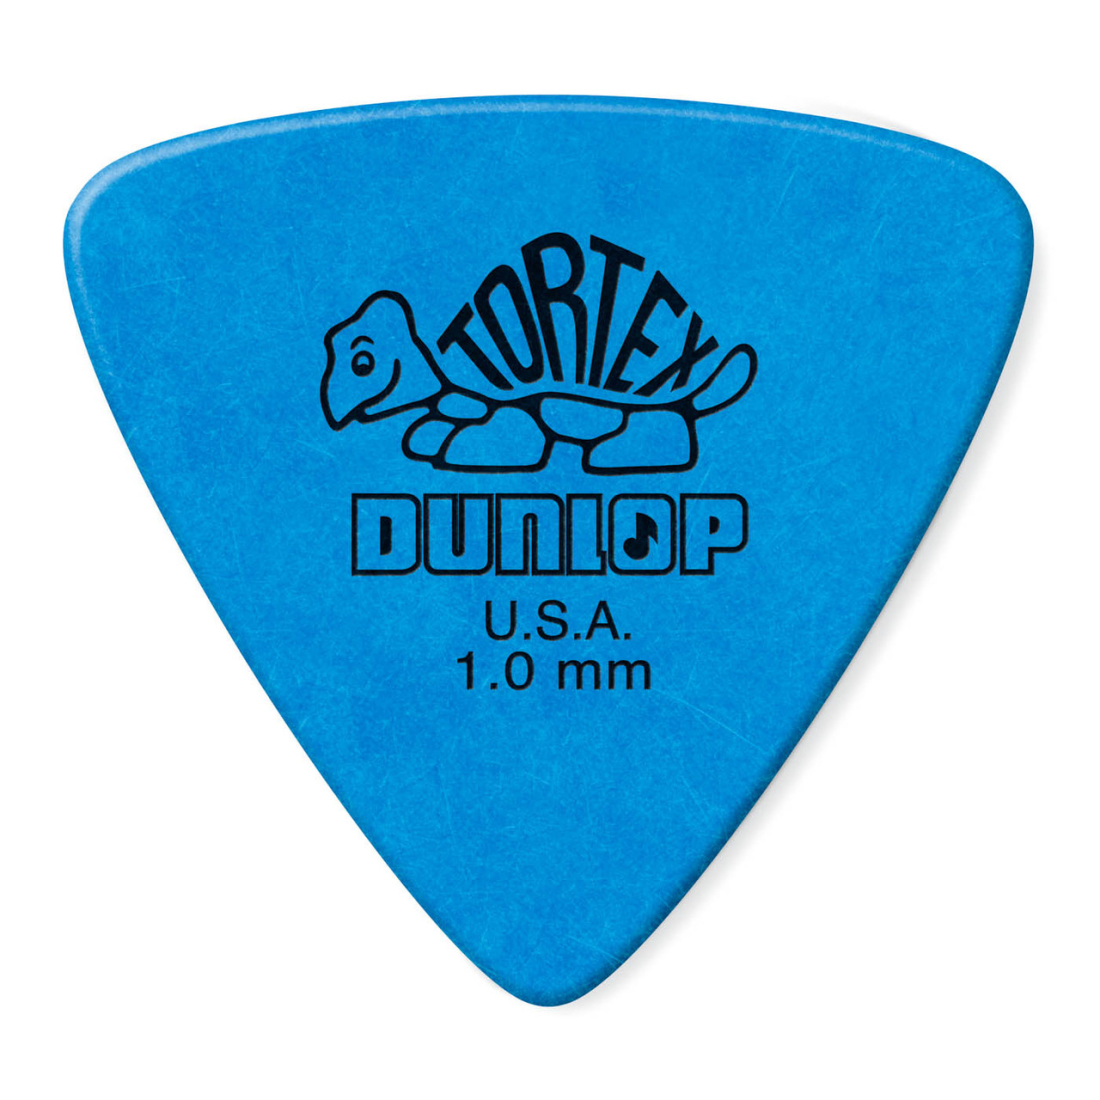 Tortex Triangle Player Pack (72 Pack) - 1.0mm